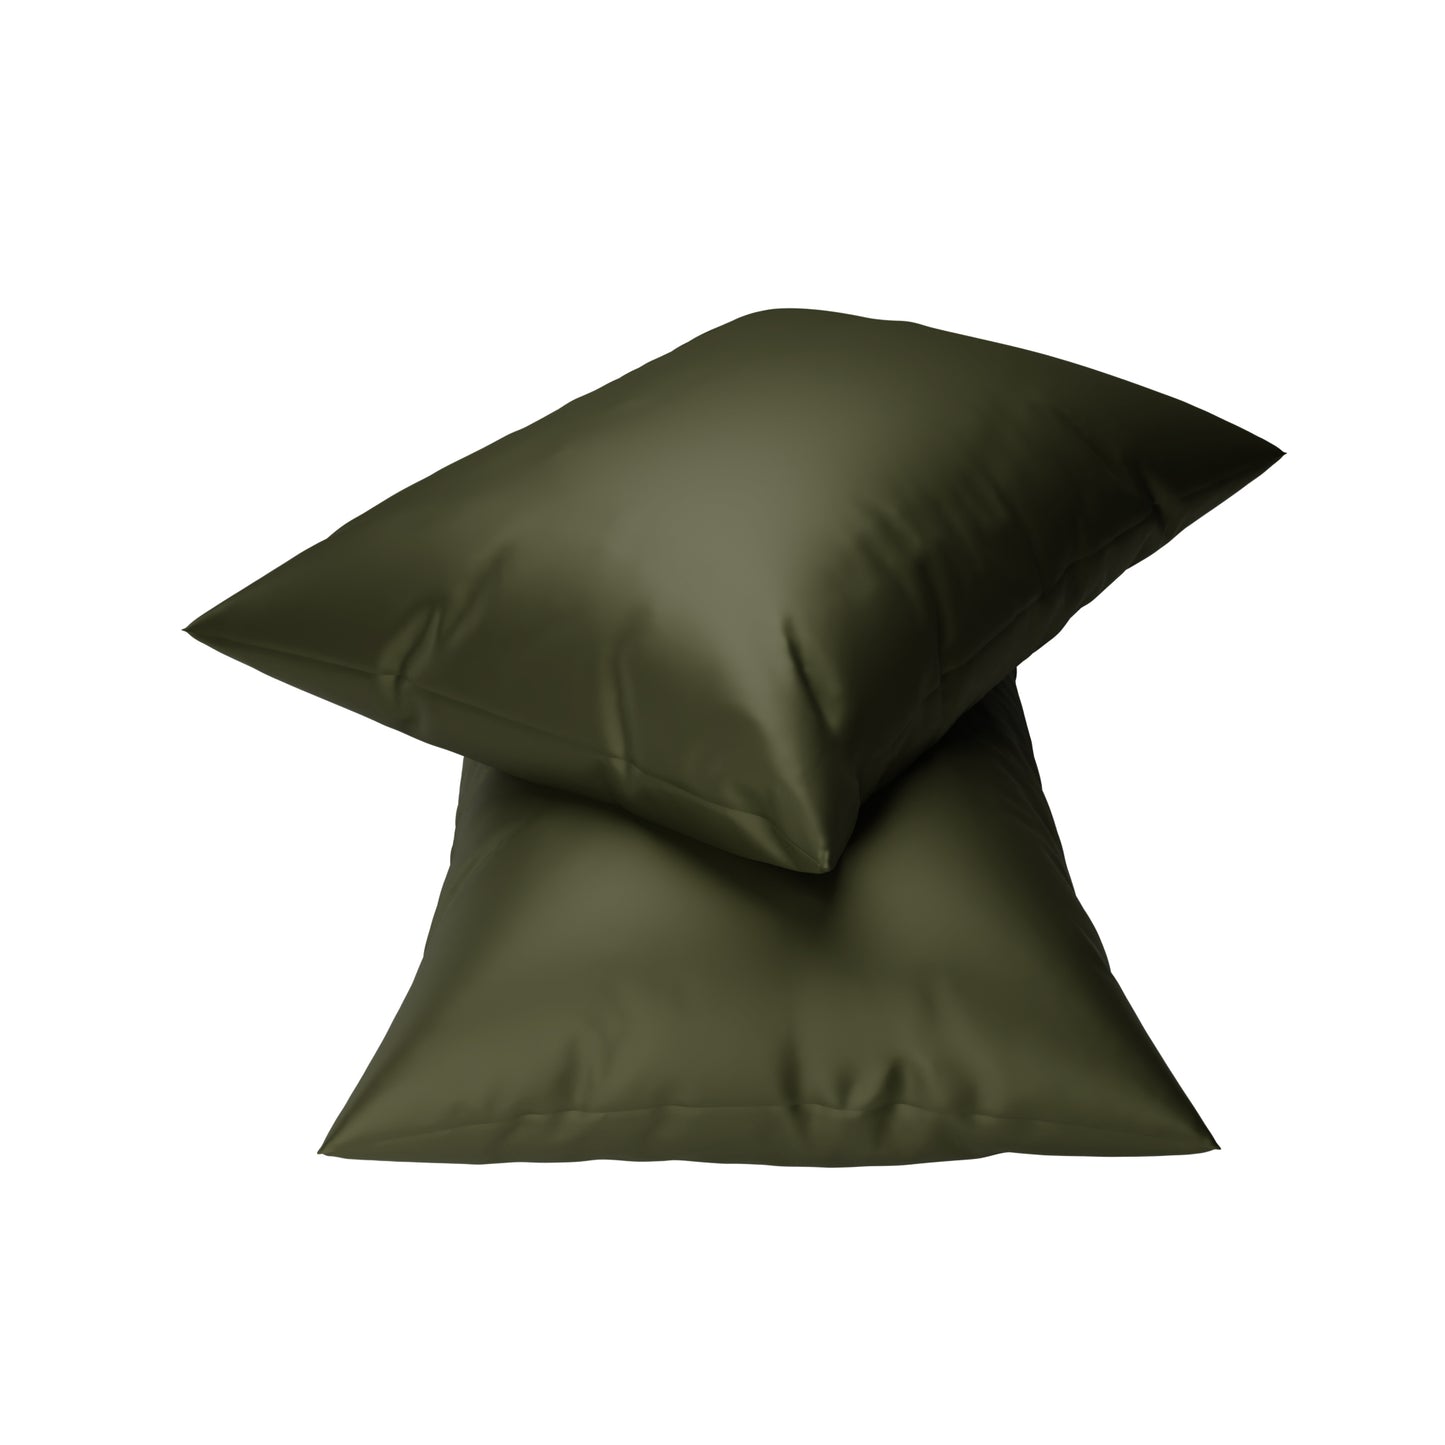 Stoa Paris Ultra Sateen Set of 2 Olive Oasis Pillow Cover From SilkLike Collection